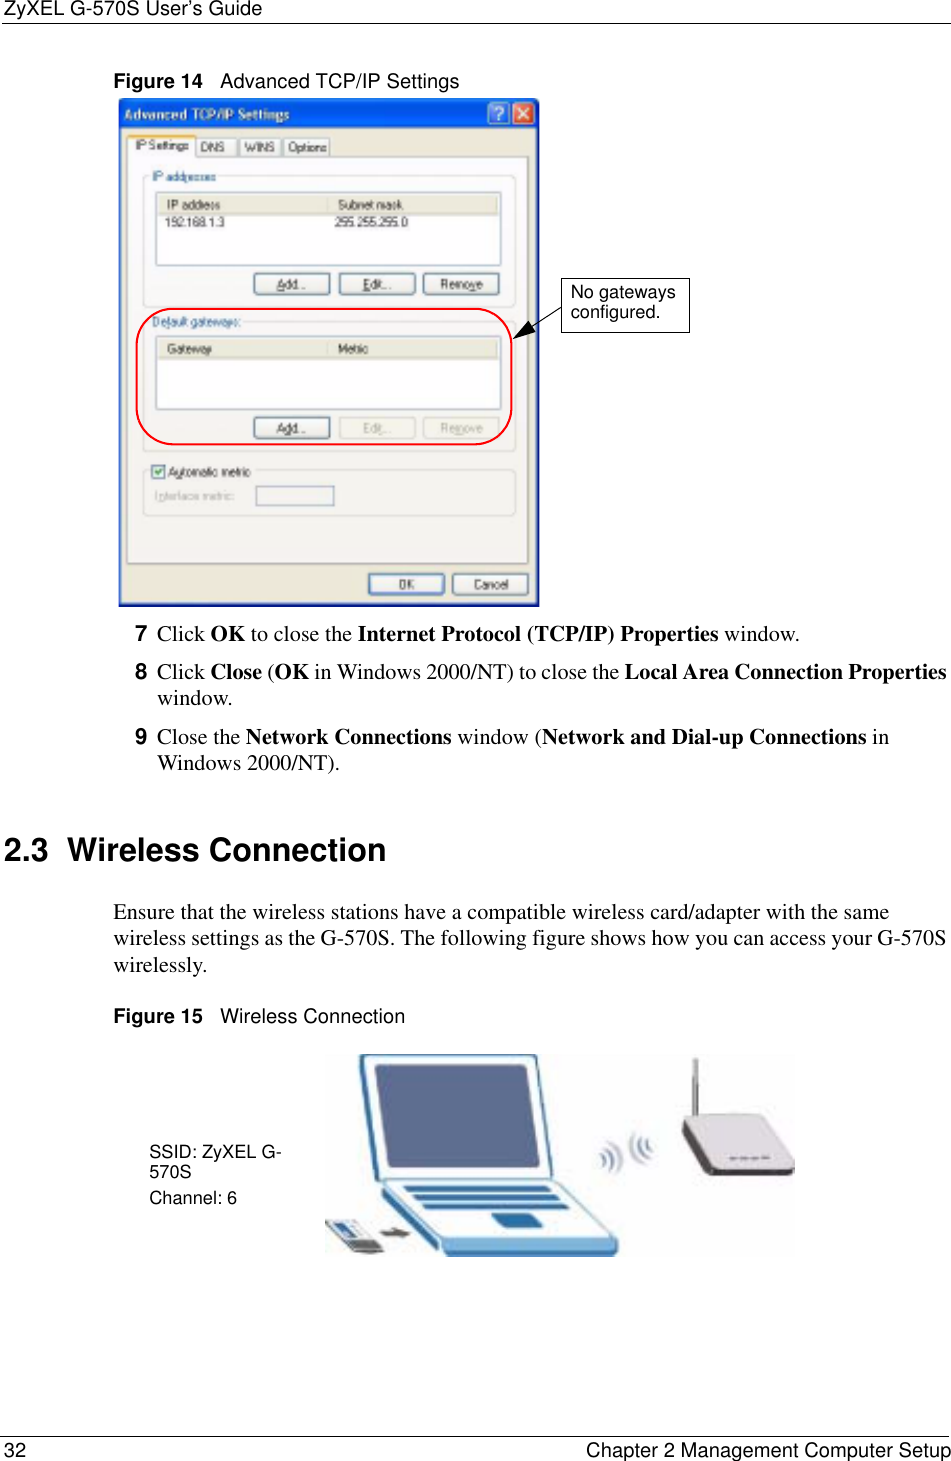 ZyXEL G-570S User’s Guide32 Chapter 2 Management Computer SetupFigure 14   Advanced TCP/IP Settings7Click OK to close the Internet Protocol (TCP/IP) Properties window.8Click Close (OK in Windows 2000/NT) to close the Local Area Connection Propertieswindow.9Close the Network Connections window (Network and Dial-up Connections in Windows 2000/NT).2.3  Wireless ConnectionEnsure that the wireless stations have a compatible wireless card/adapter with the same wireless settings as the G-570S. The following figure shows how you can access your G-570S wirelessly.Figure 15   Wireless ConnectionNo gateways configured.SSID: ZyXEL G-570SChannel: 6